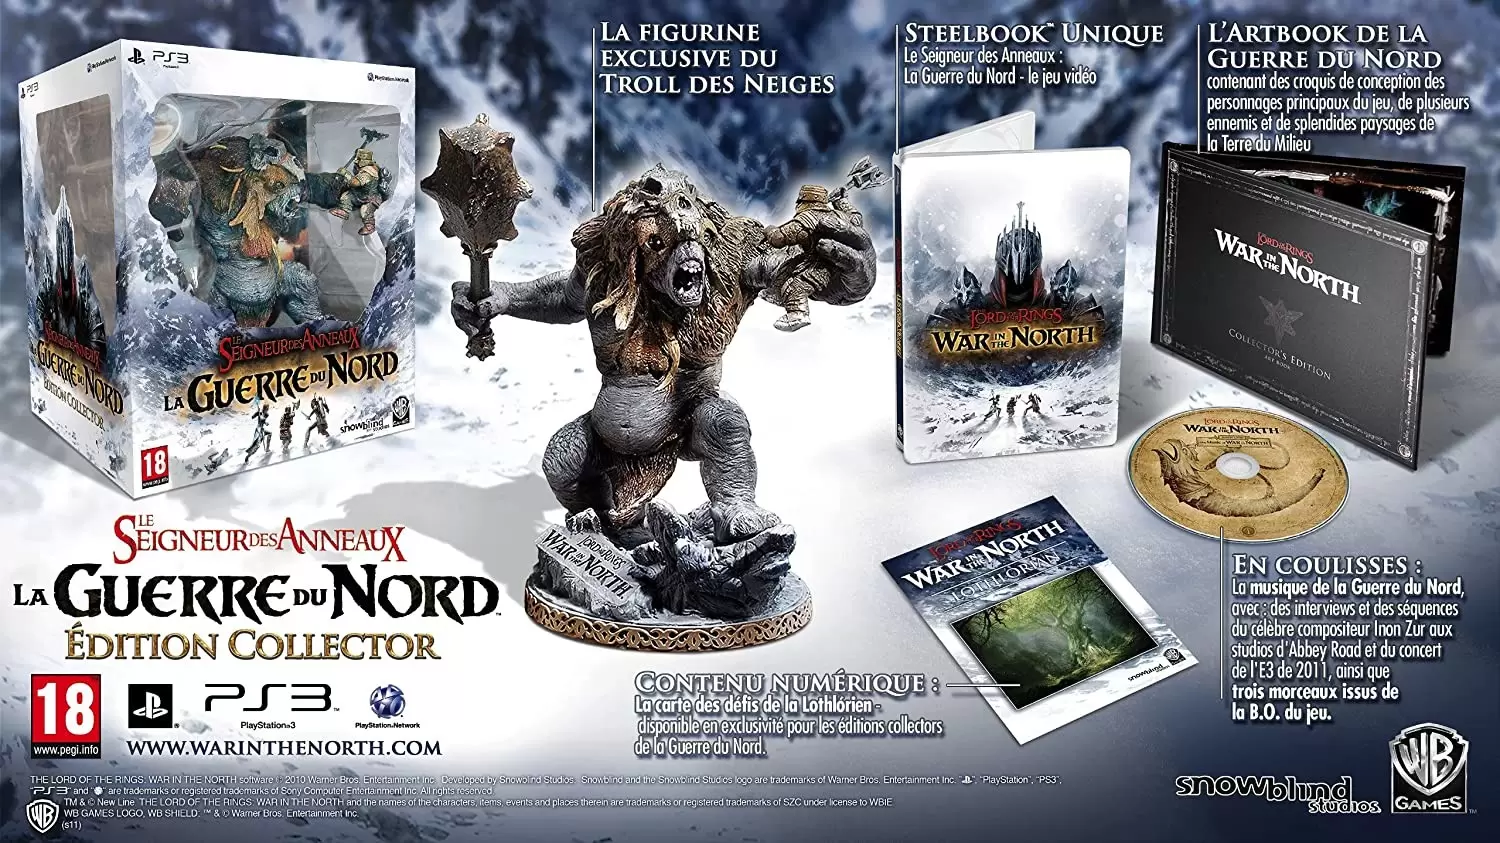 Lord of the Rings: War in the North for PlayStation 3